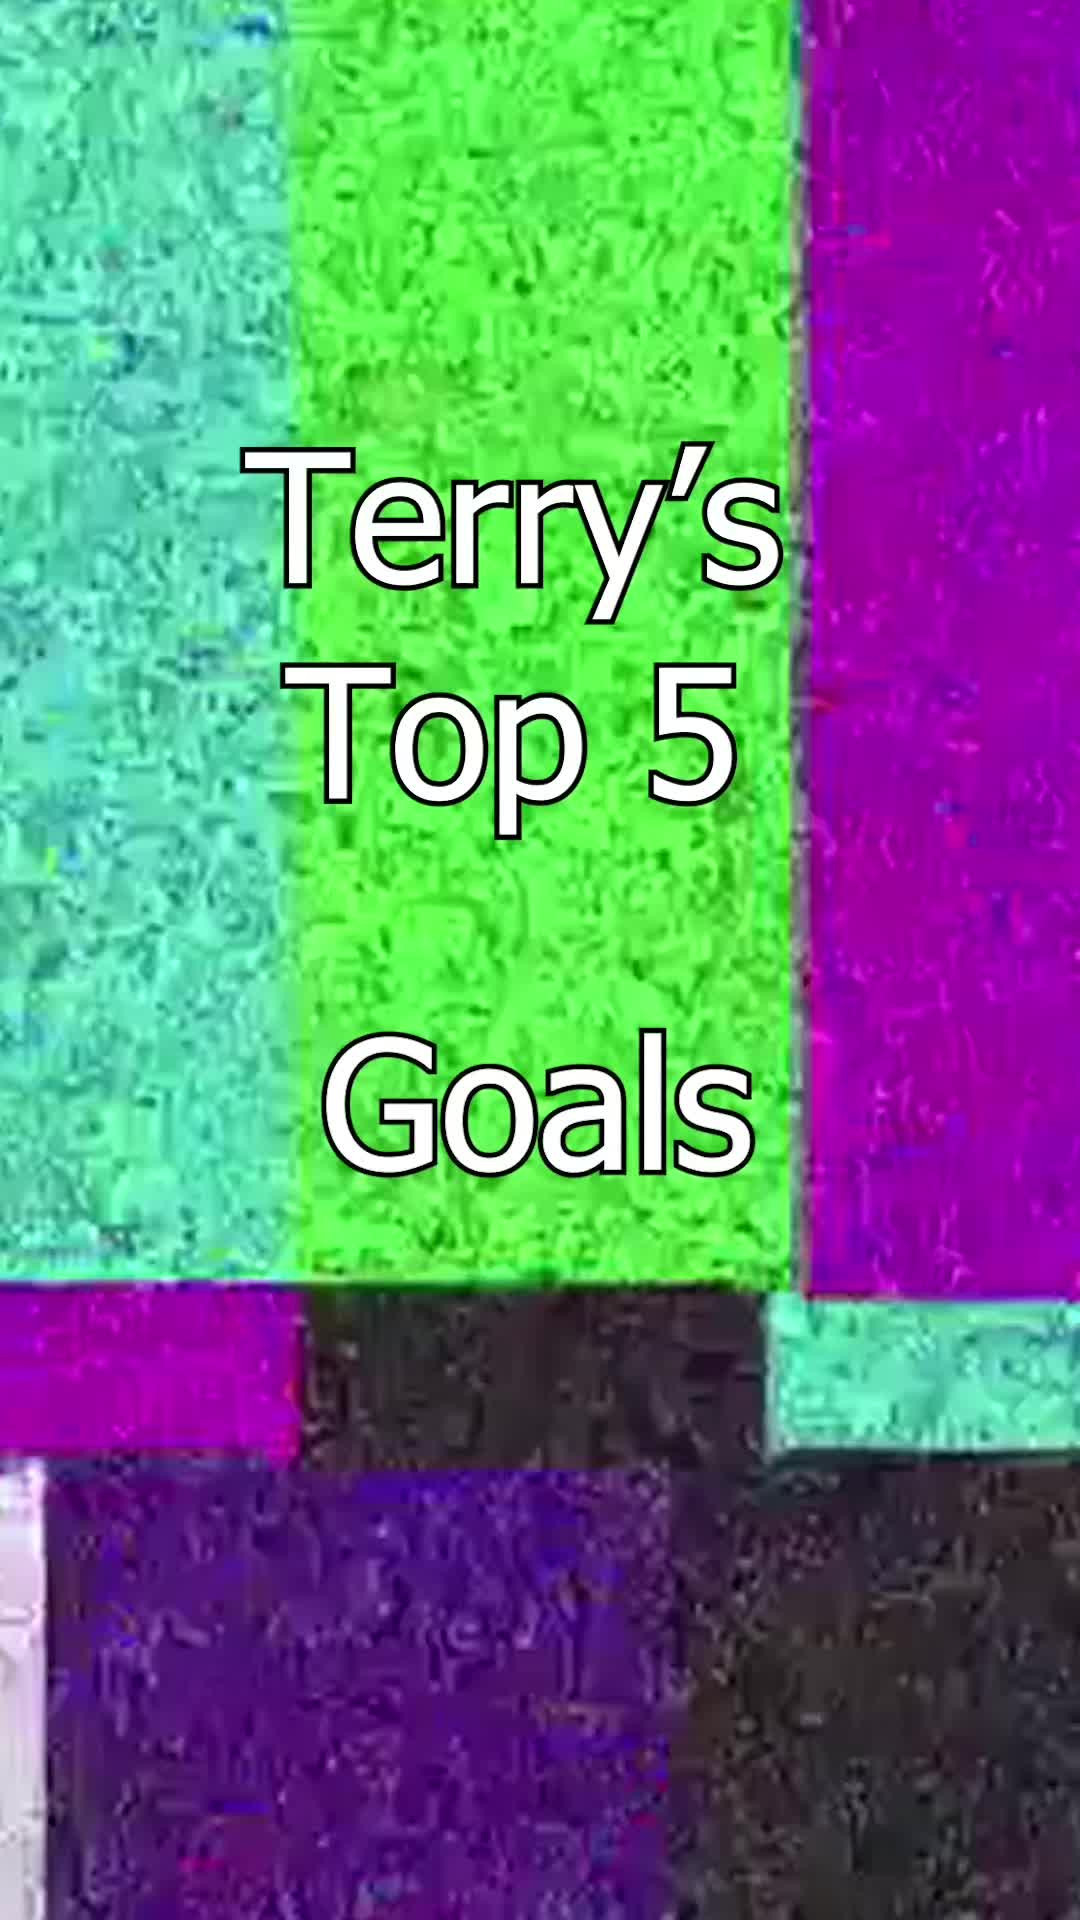 Here are the Top 5 Goals as Submitted By You! #nhl #nhl23 #hockey #sports #comedyvideo #goals #twitch #hockeytiktoks #gaming #foryou #foryoupage #fyp #easports #easportsnhl #nhl23clips #nhlcomedy #sportscomedy @bish_182 @Loukzz @Tyler Michael Wild 